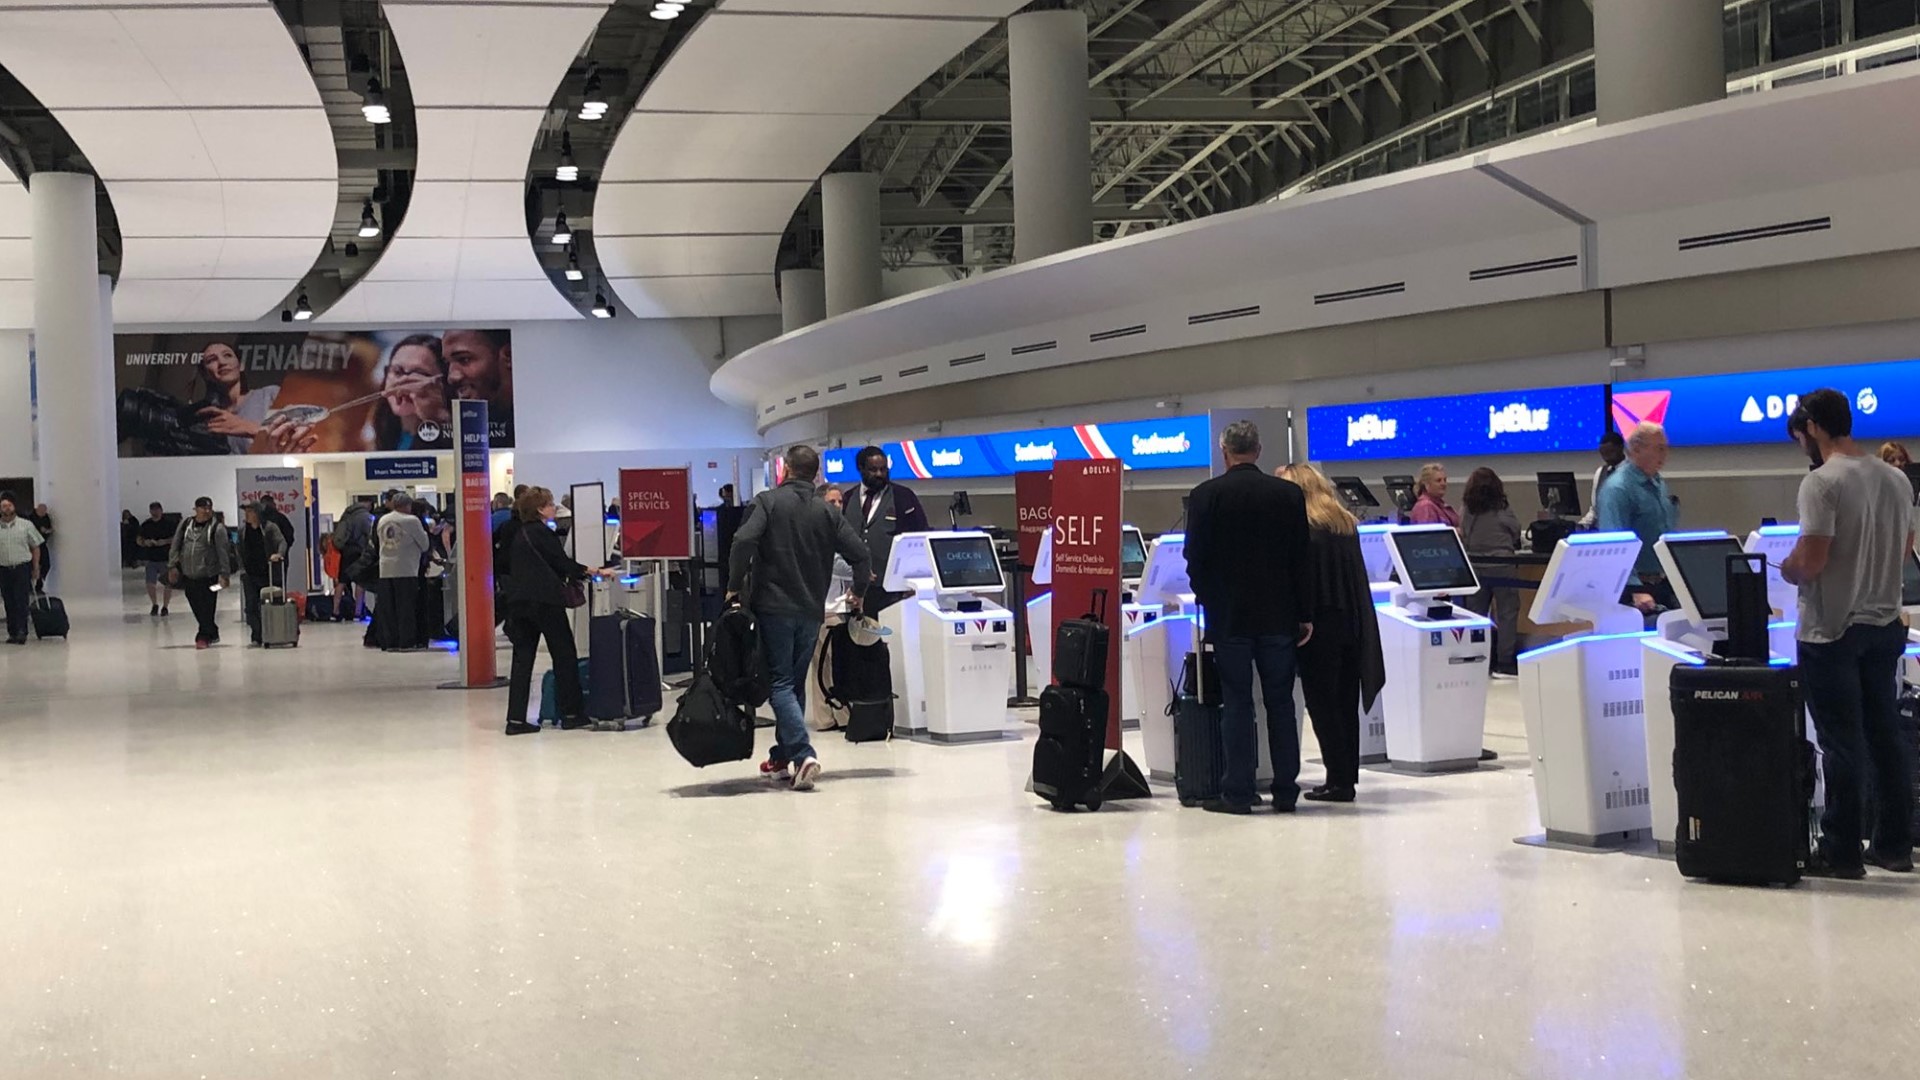 The long-awaited often delayed opening of the billion-dollar airport terminal at Louis Armstrong New Orleans International Airport is finally happening.